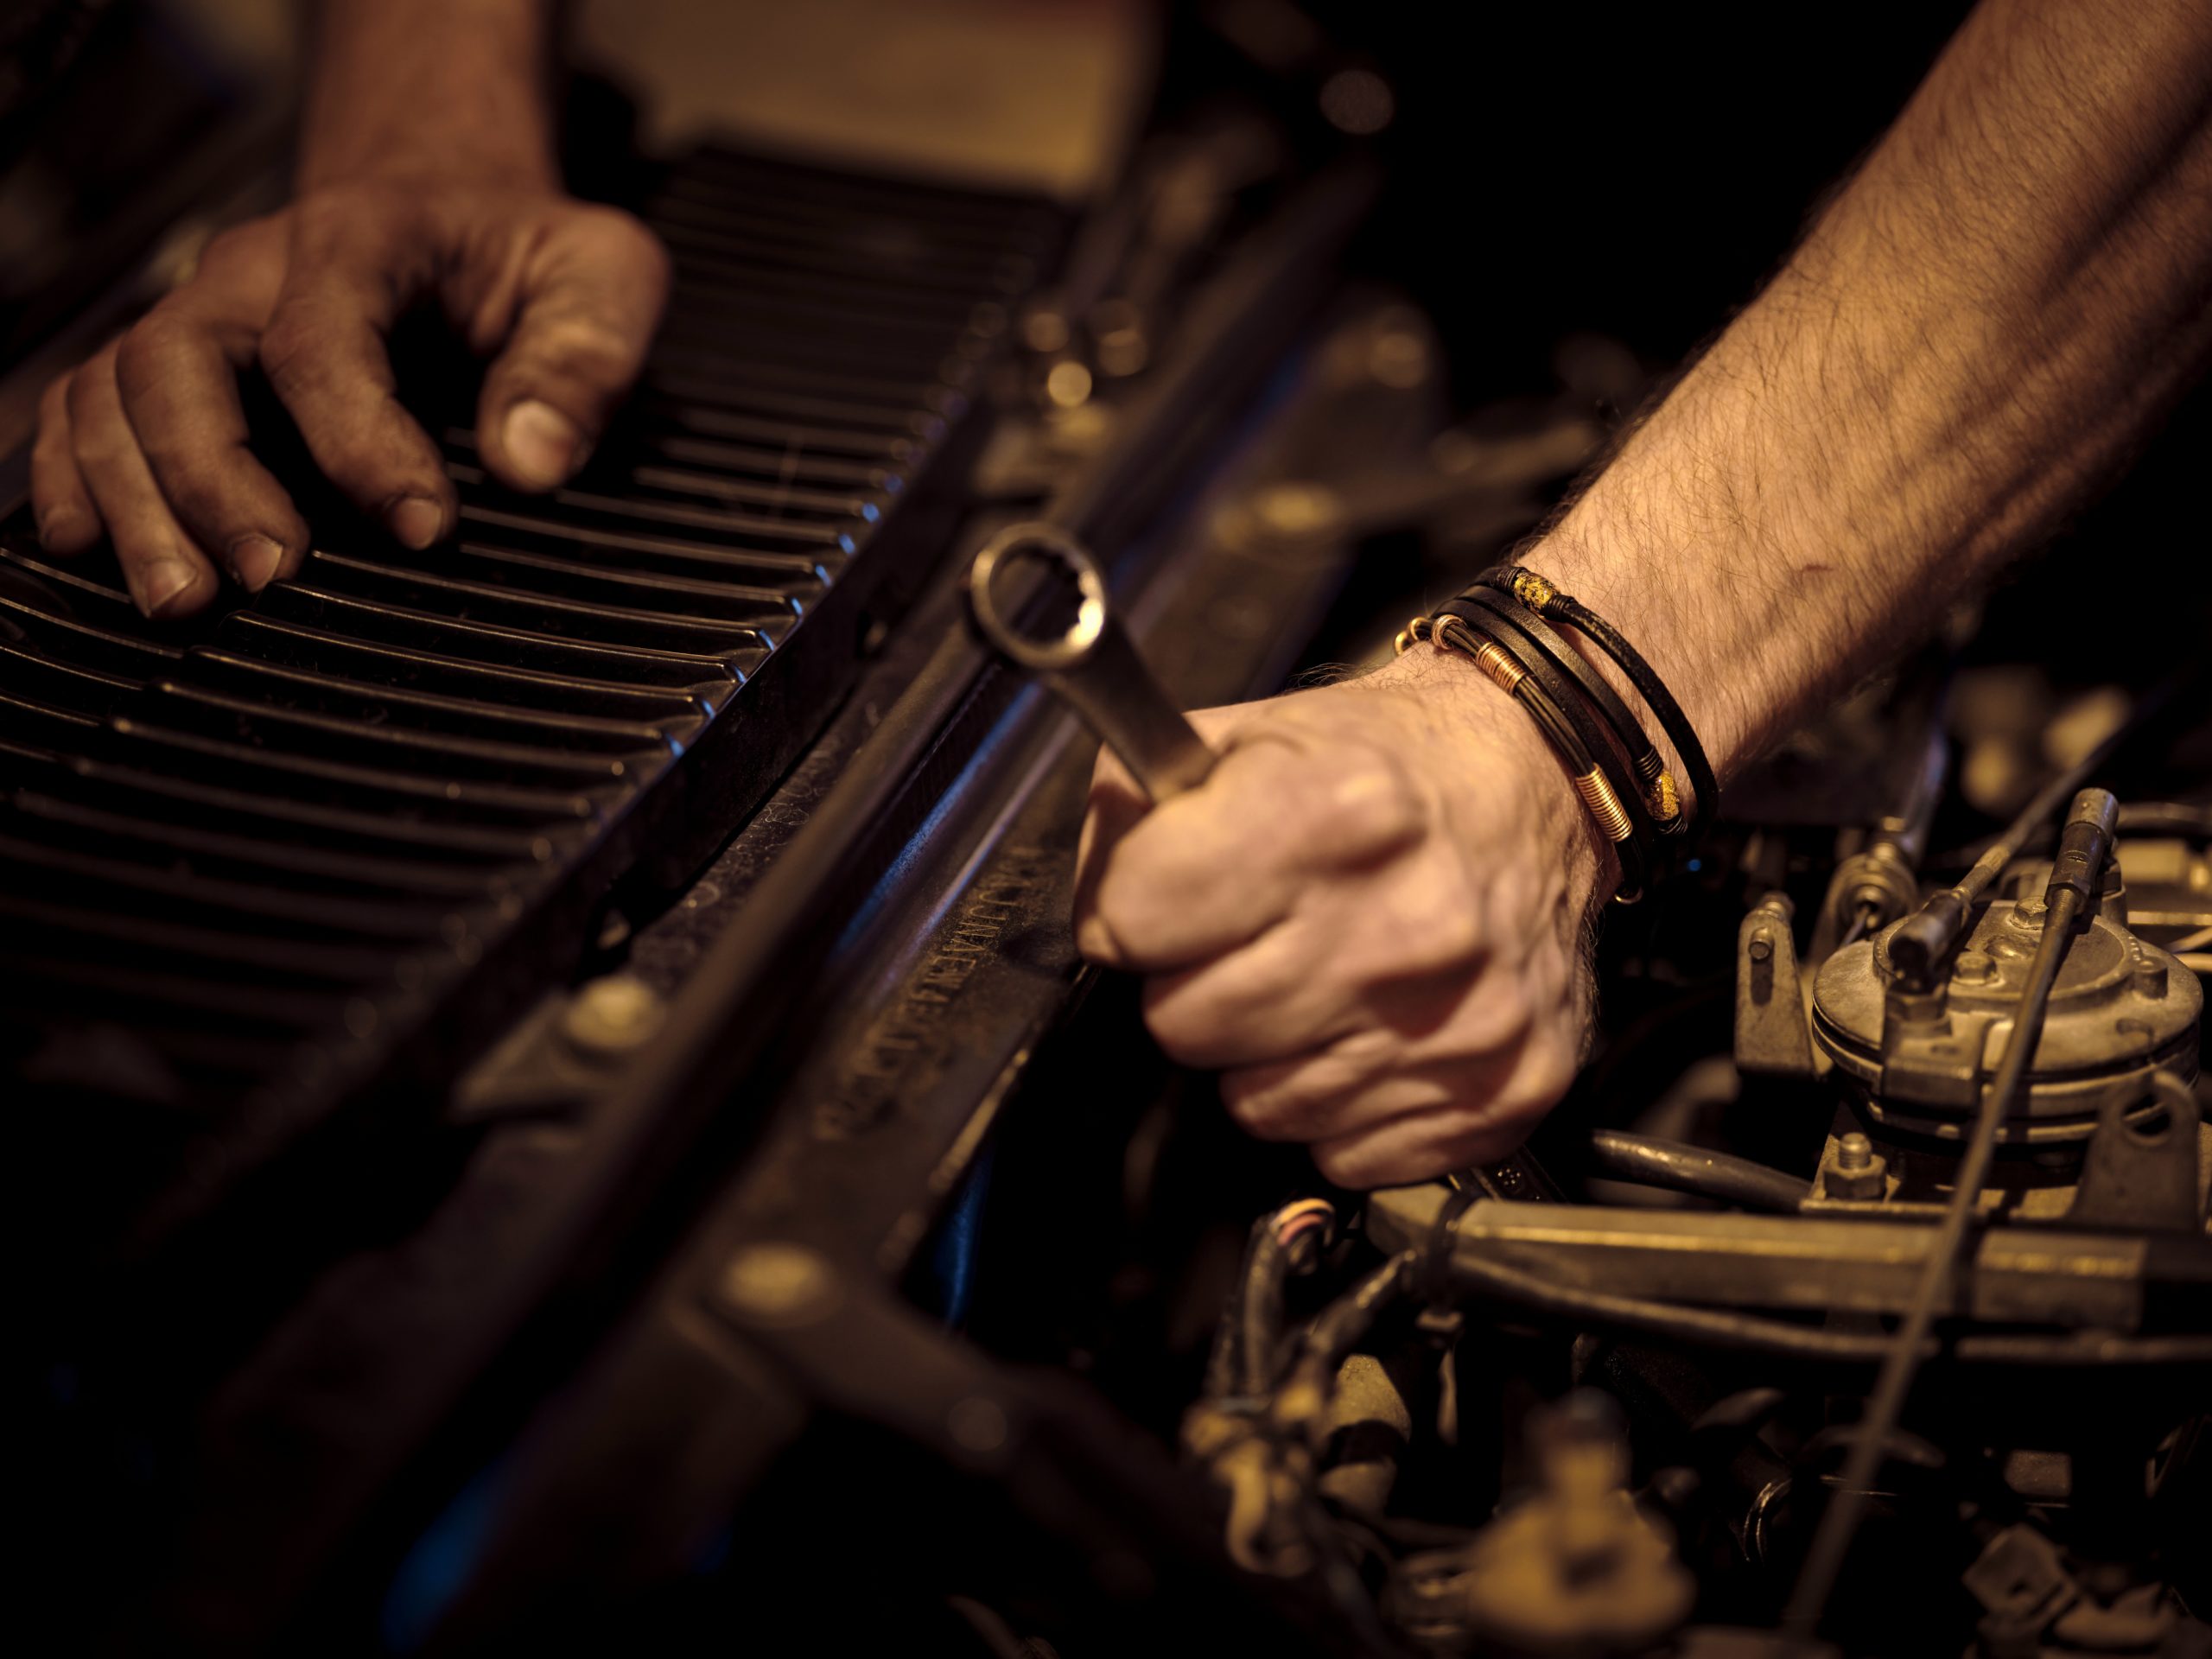 Revving Up Cabot: The Top 5 Mechanic Shops to Keep Your Wheels Turning